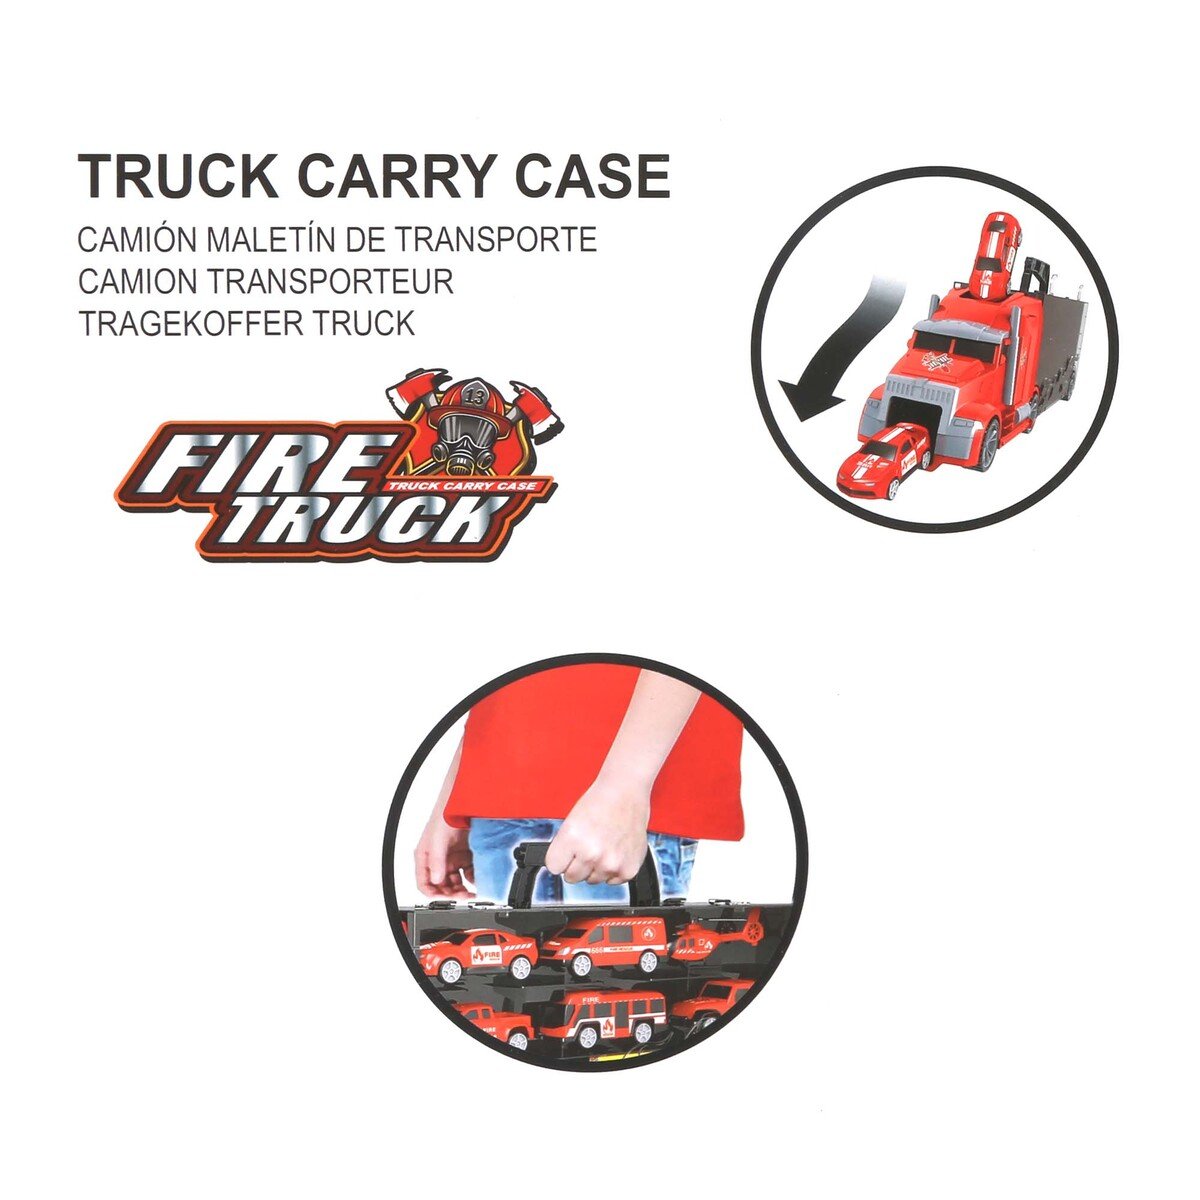 Jinjia Fire Truck Carry Case With 5 Cars 666-05K